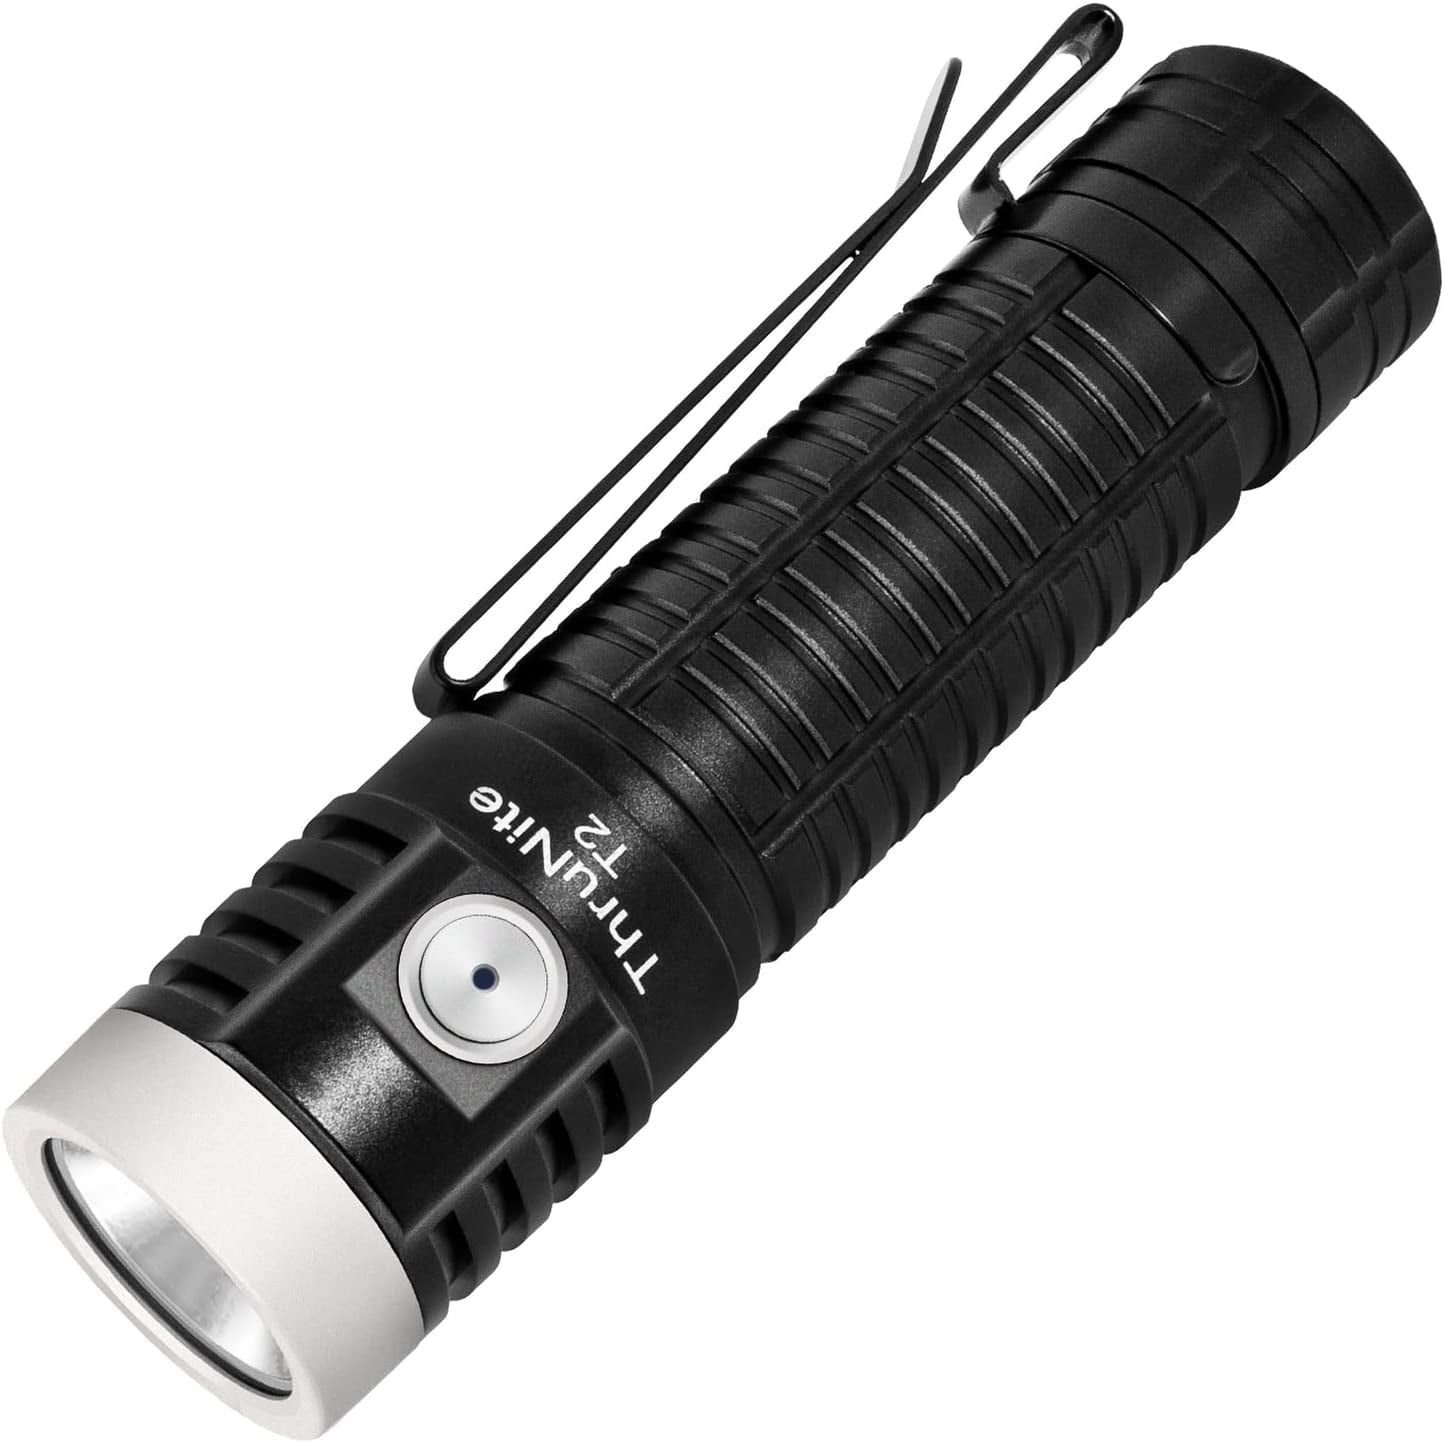 Desert Tan THRUNITE TW20 USB-C Rechargeable Weaponlight Cool White Customized Black Scout Survival Edition 2532 Lumens Tactical Flashlight for 1913 Rail 